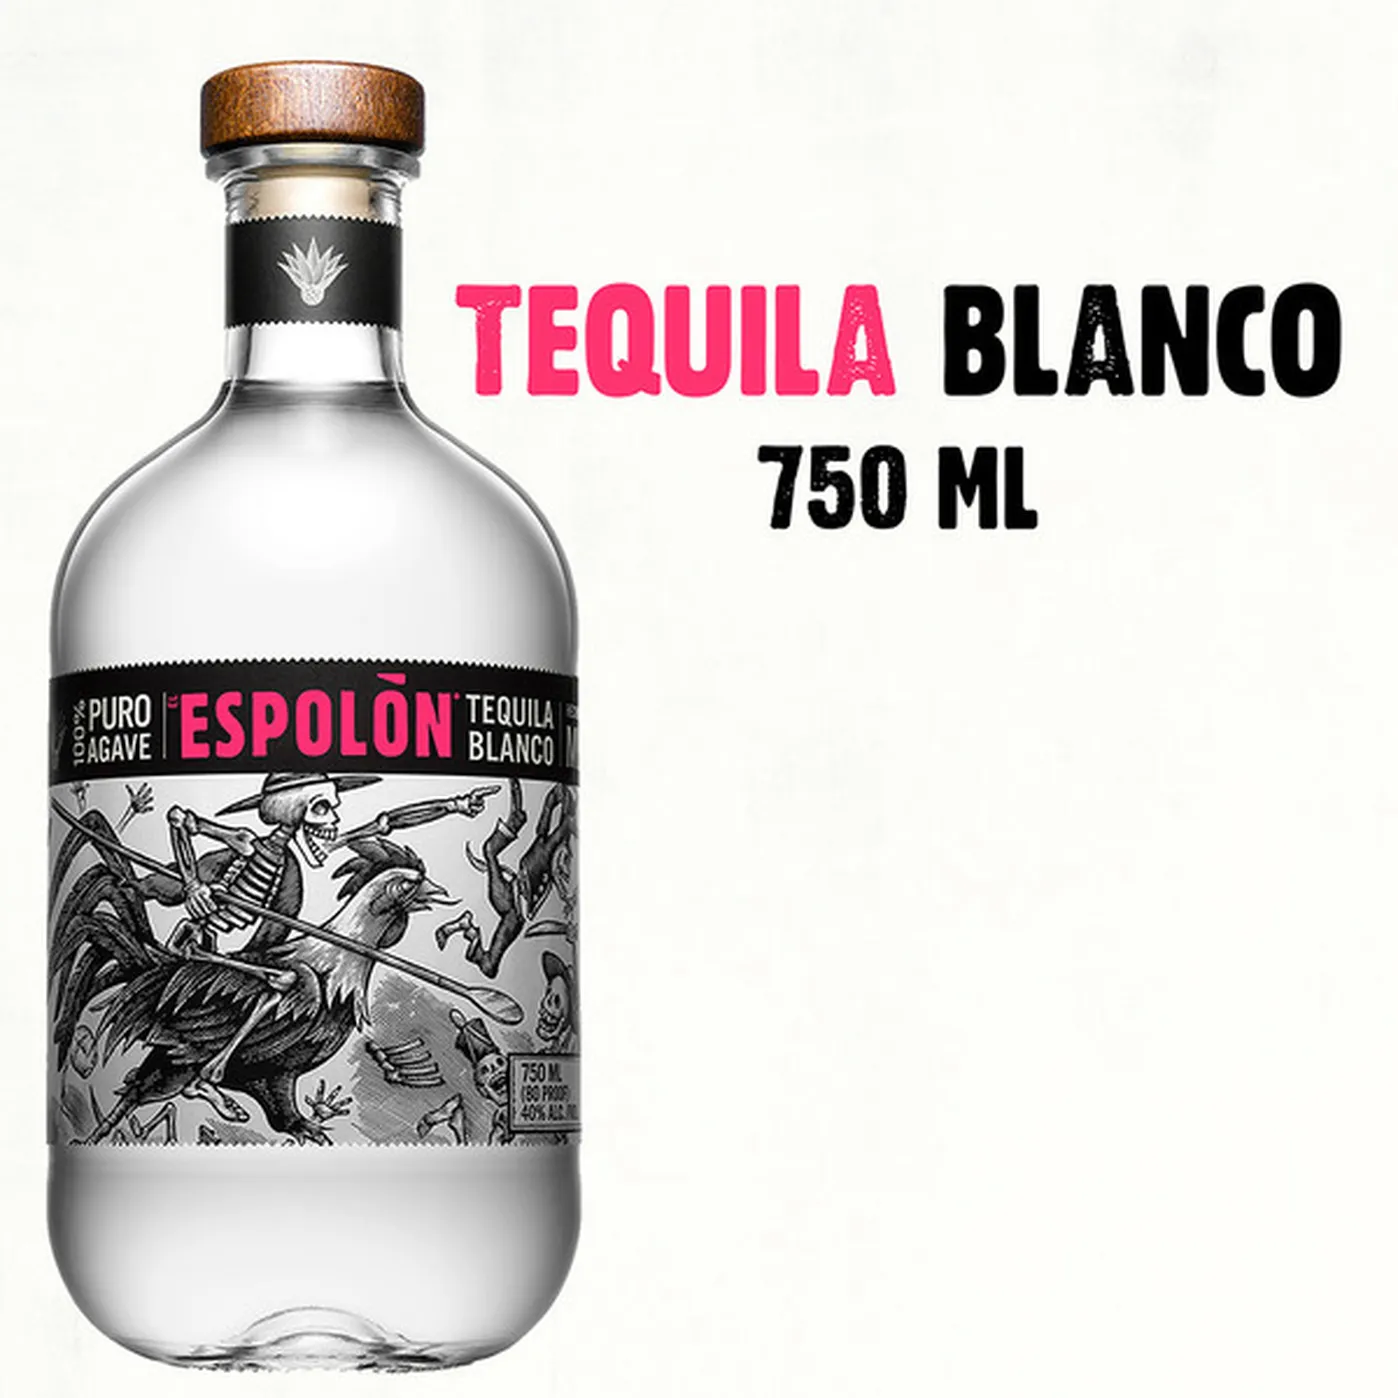 Espolon Blanco Tequila (750 ml) Delivery or Pickup Near Me - Instacart